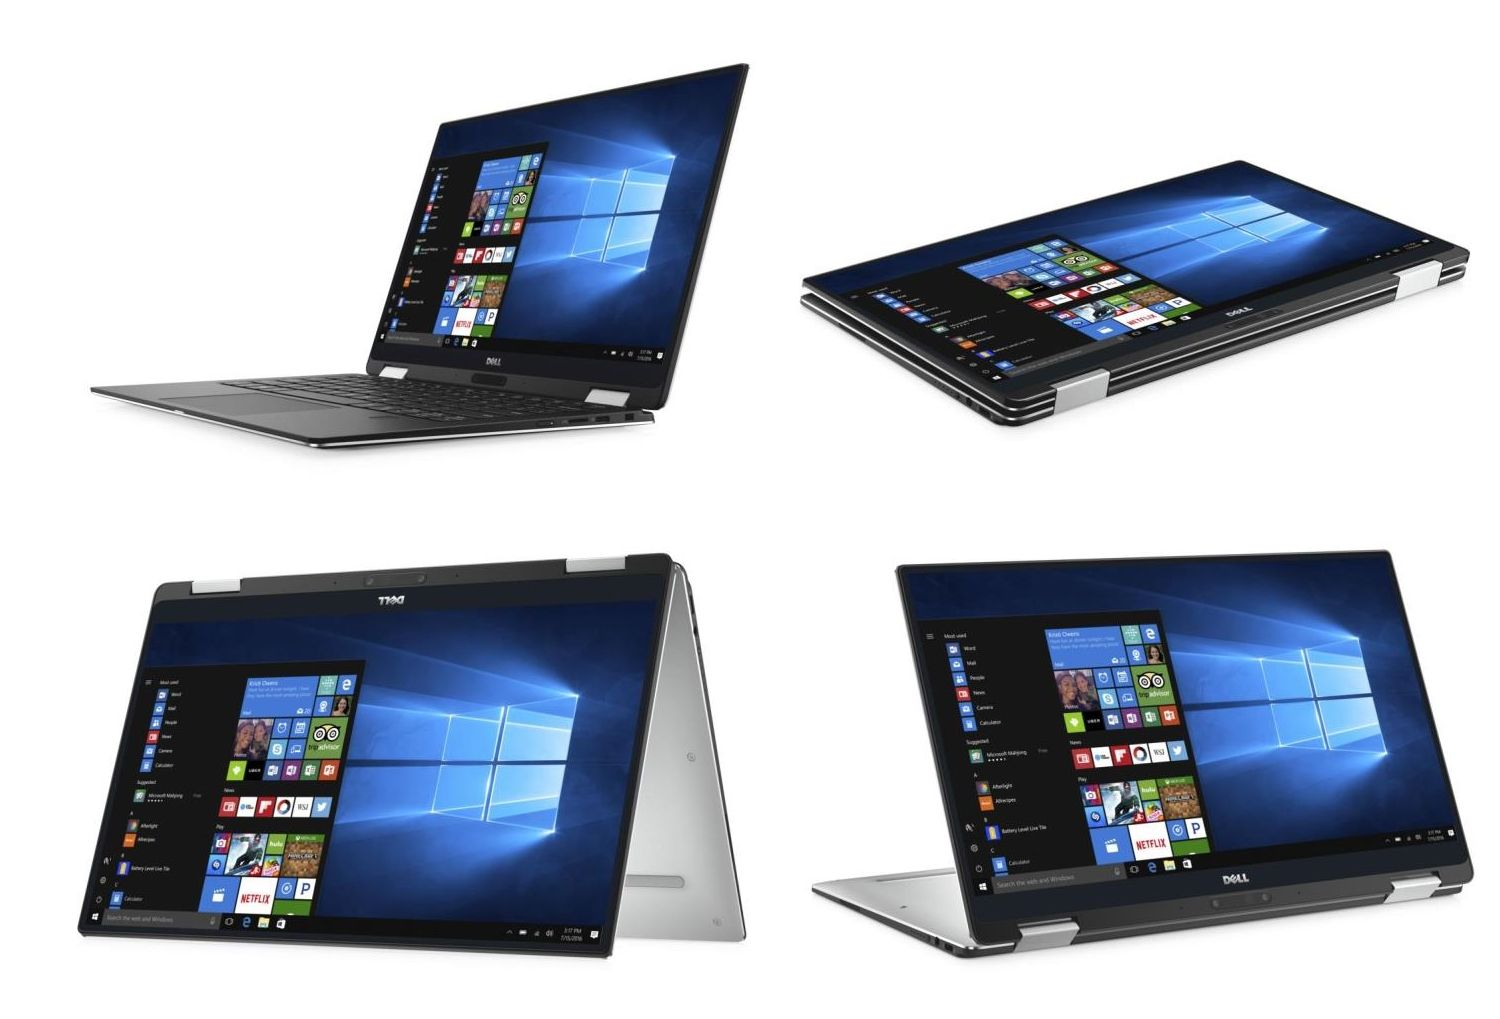 Dell XPS-13 2 in 1 Laptop